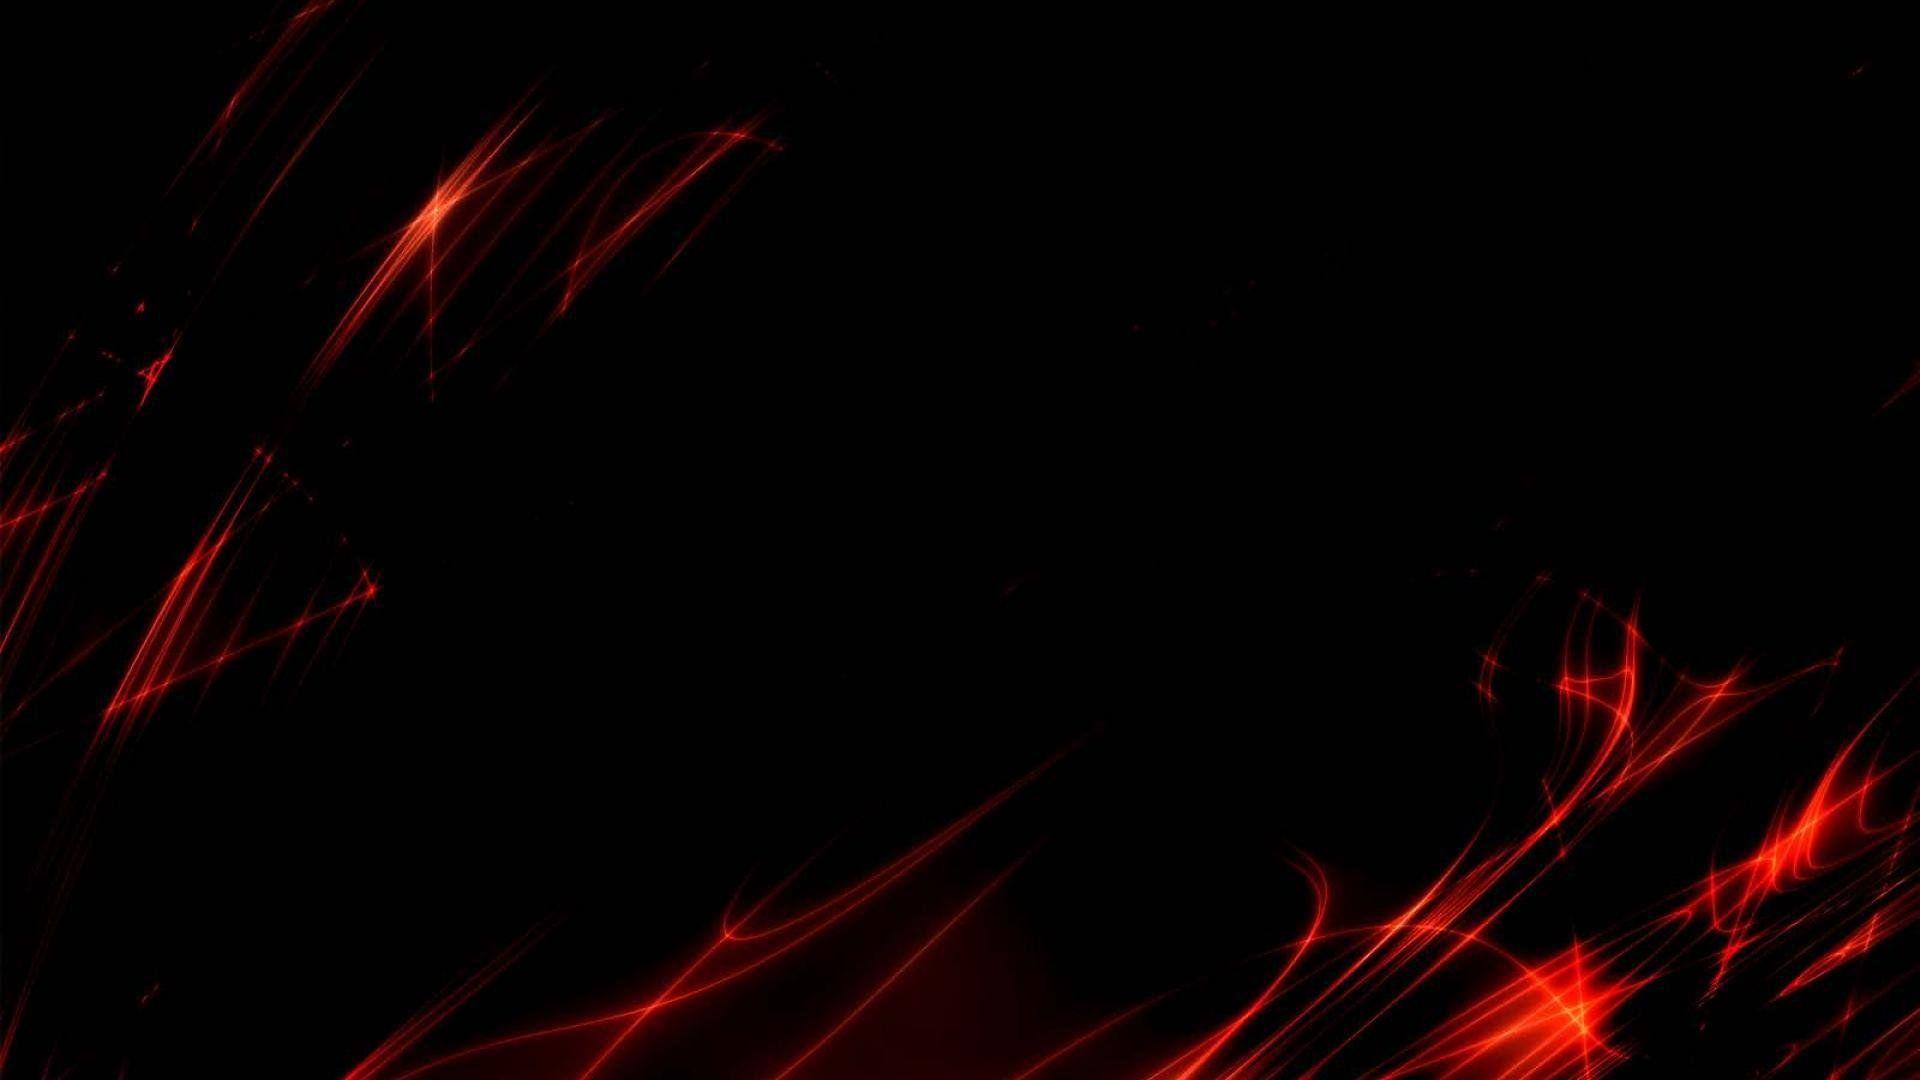 Dark Red And Black Wallpapers - Top Free Dark Red And Black Backgrounds